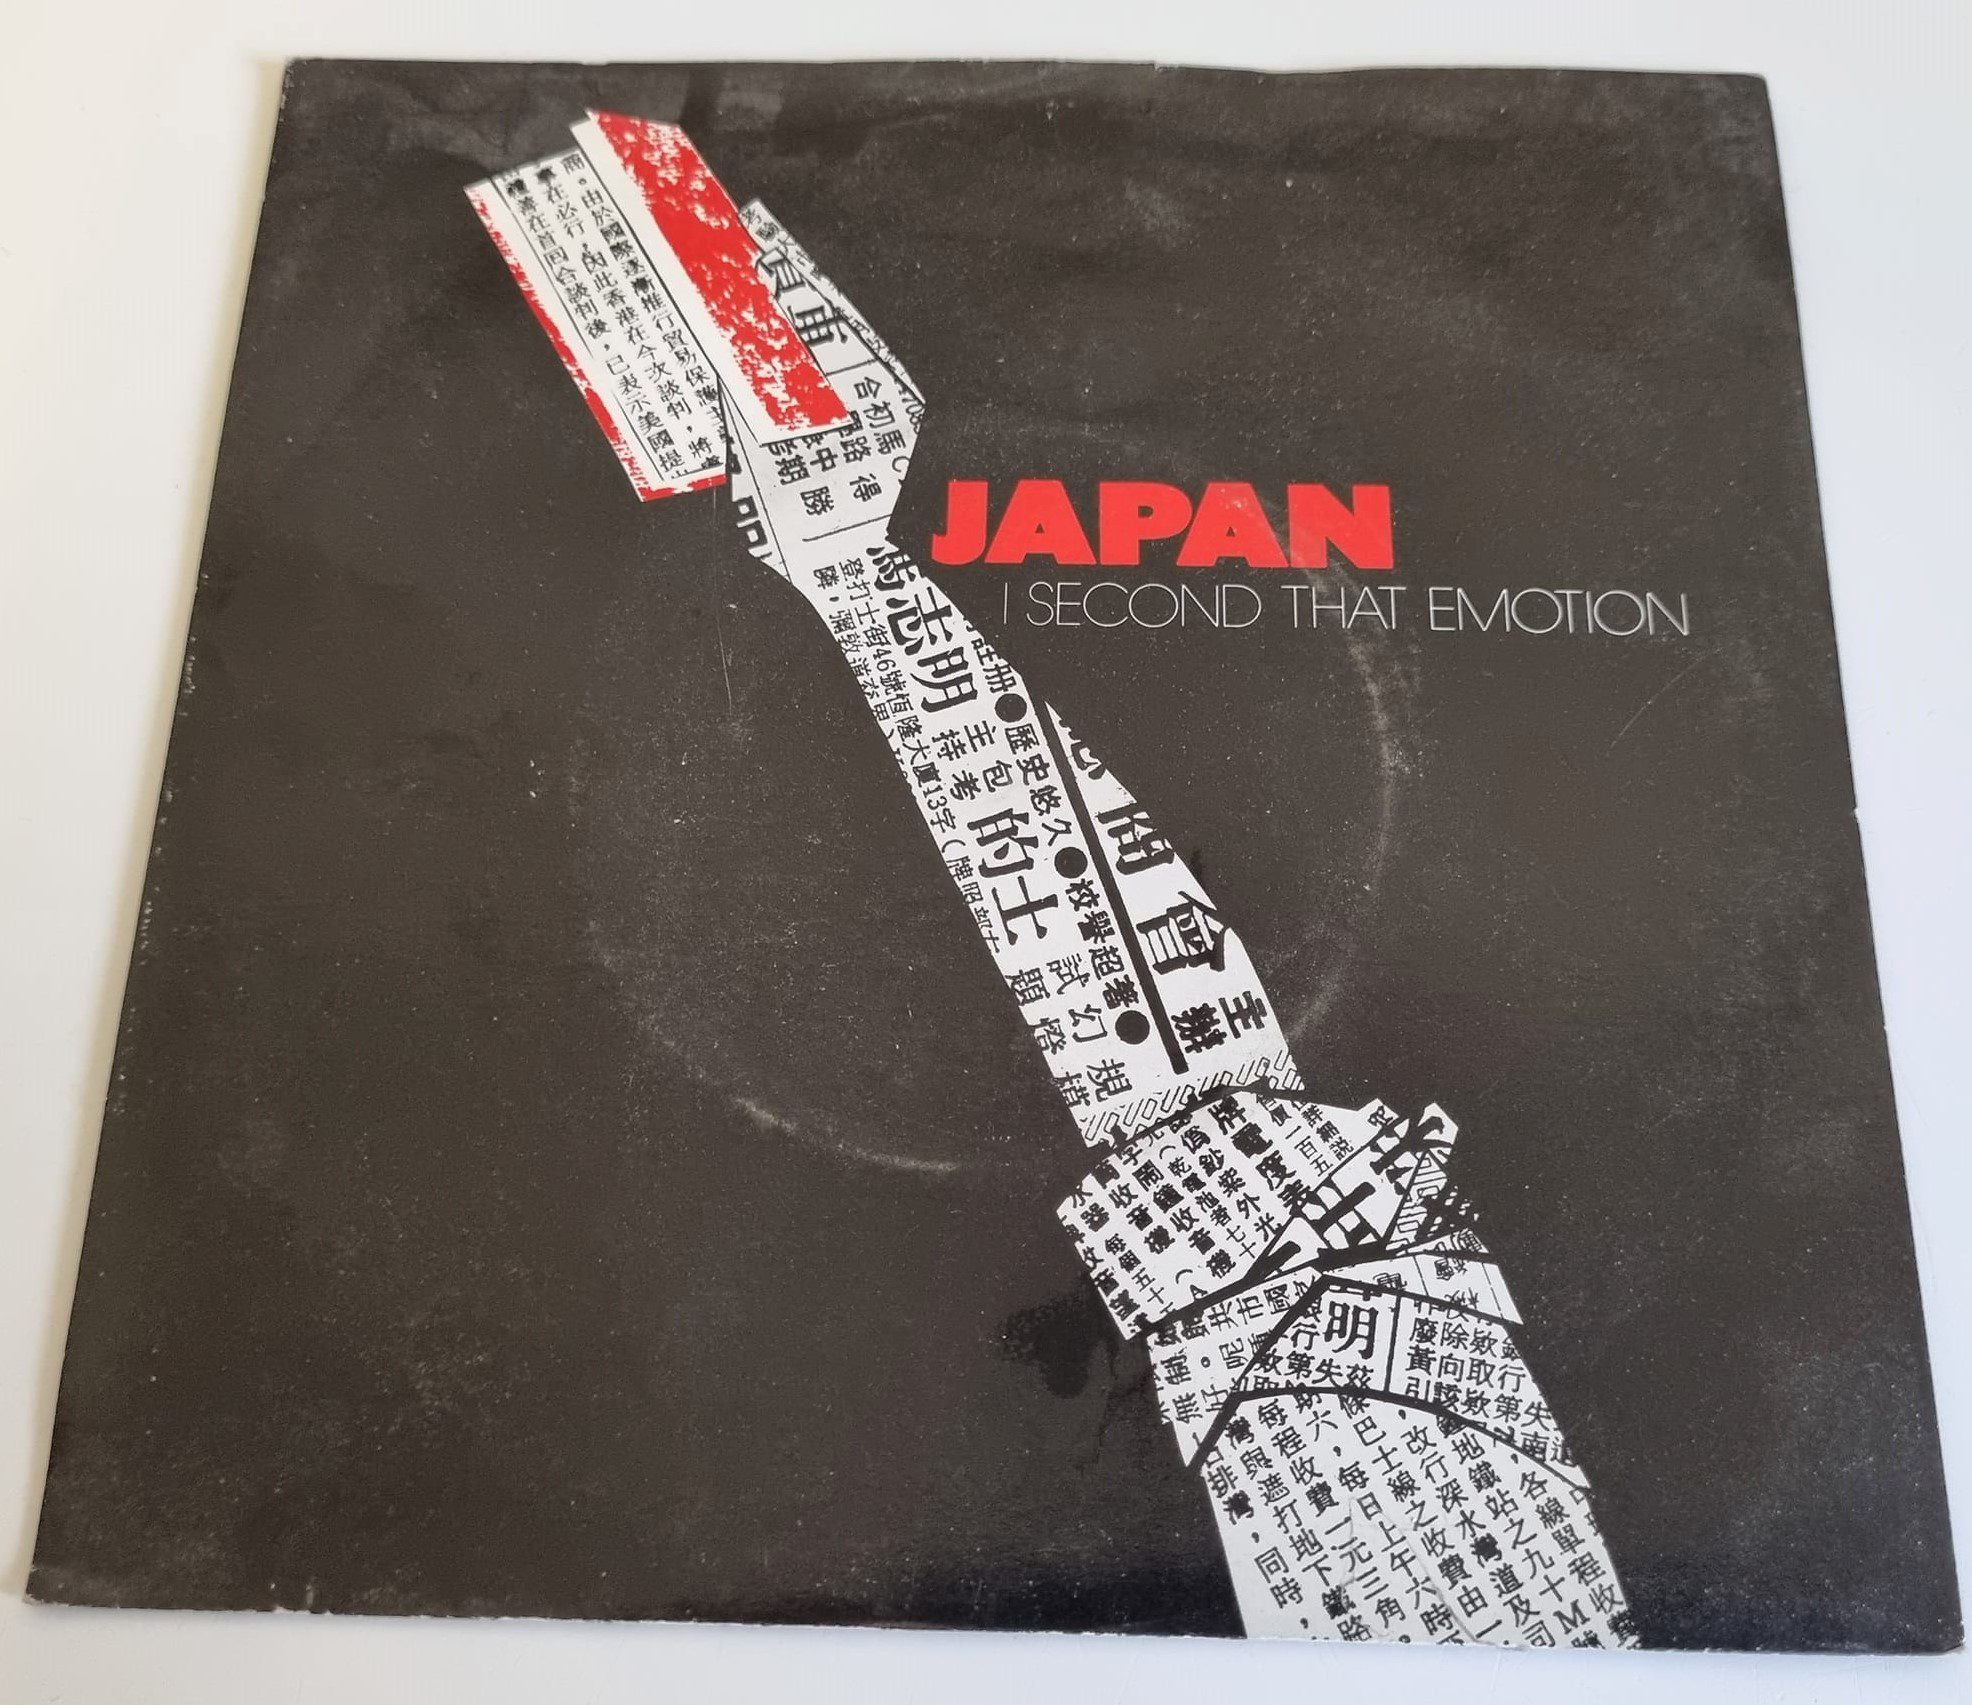 Buy this rare Japan record by clicking here